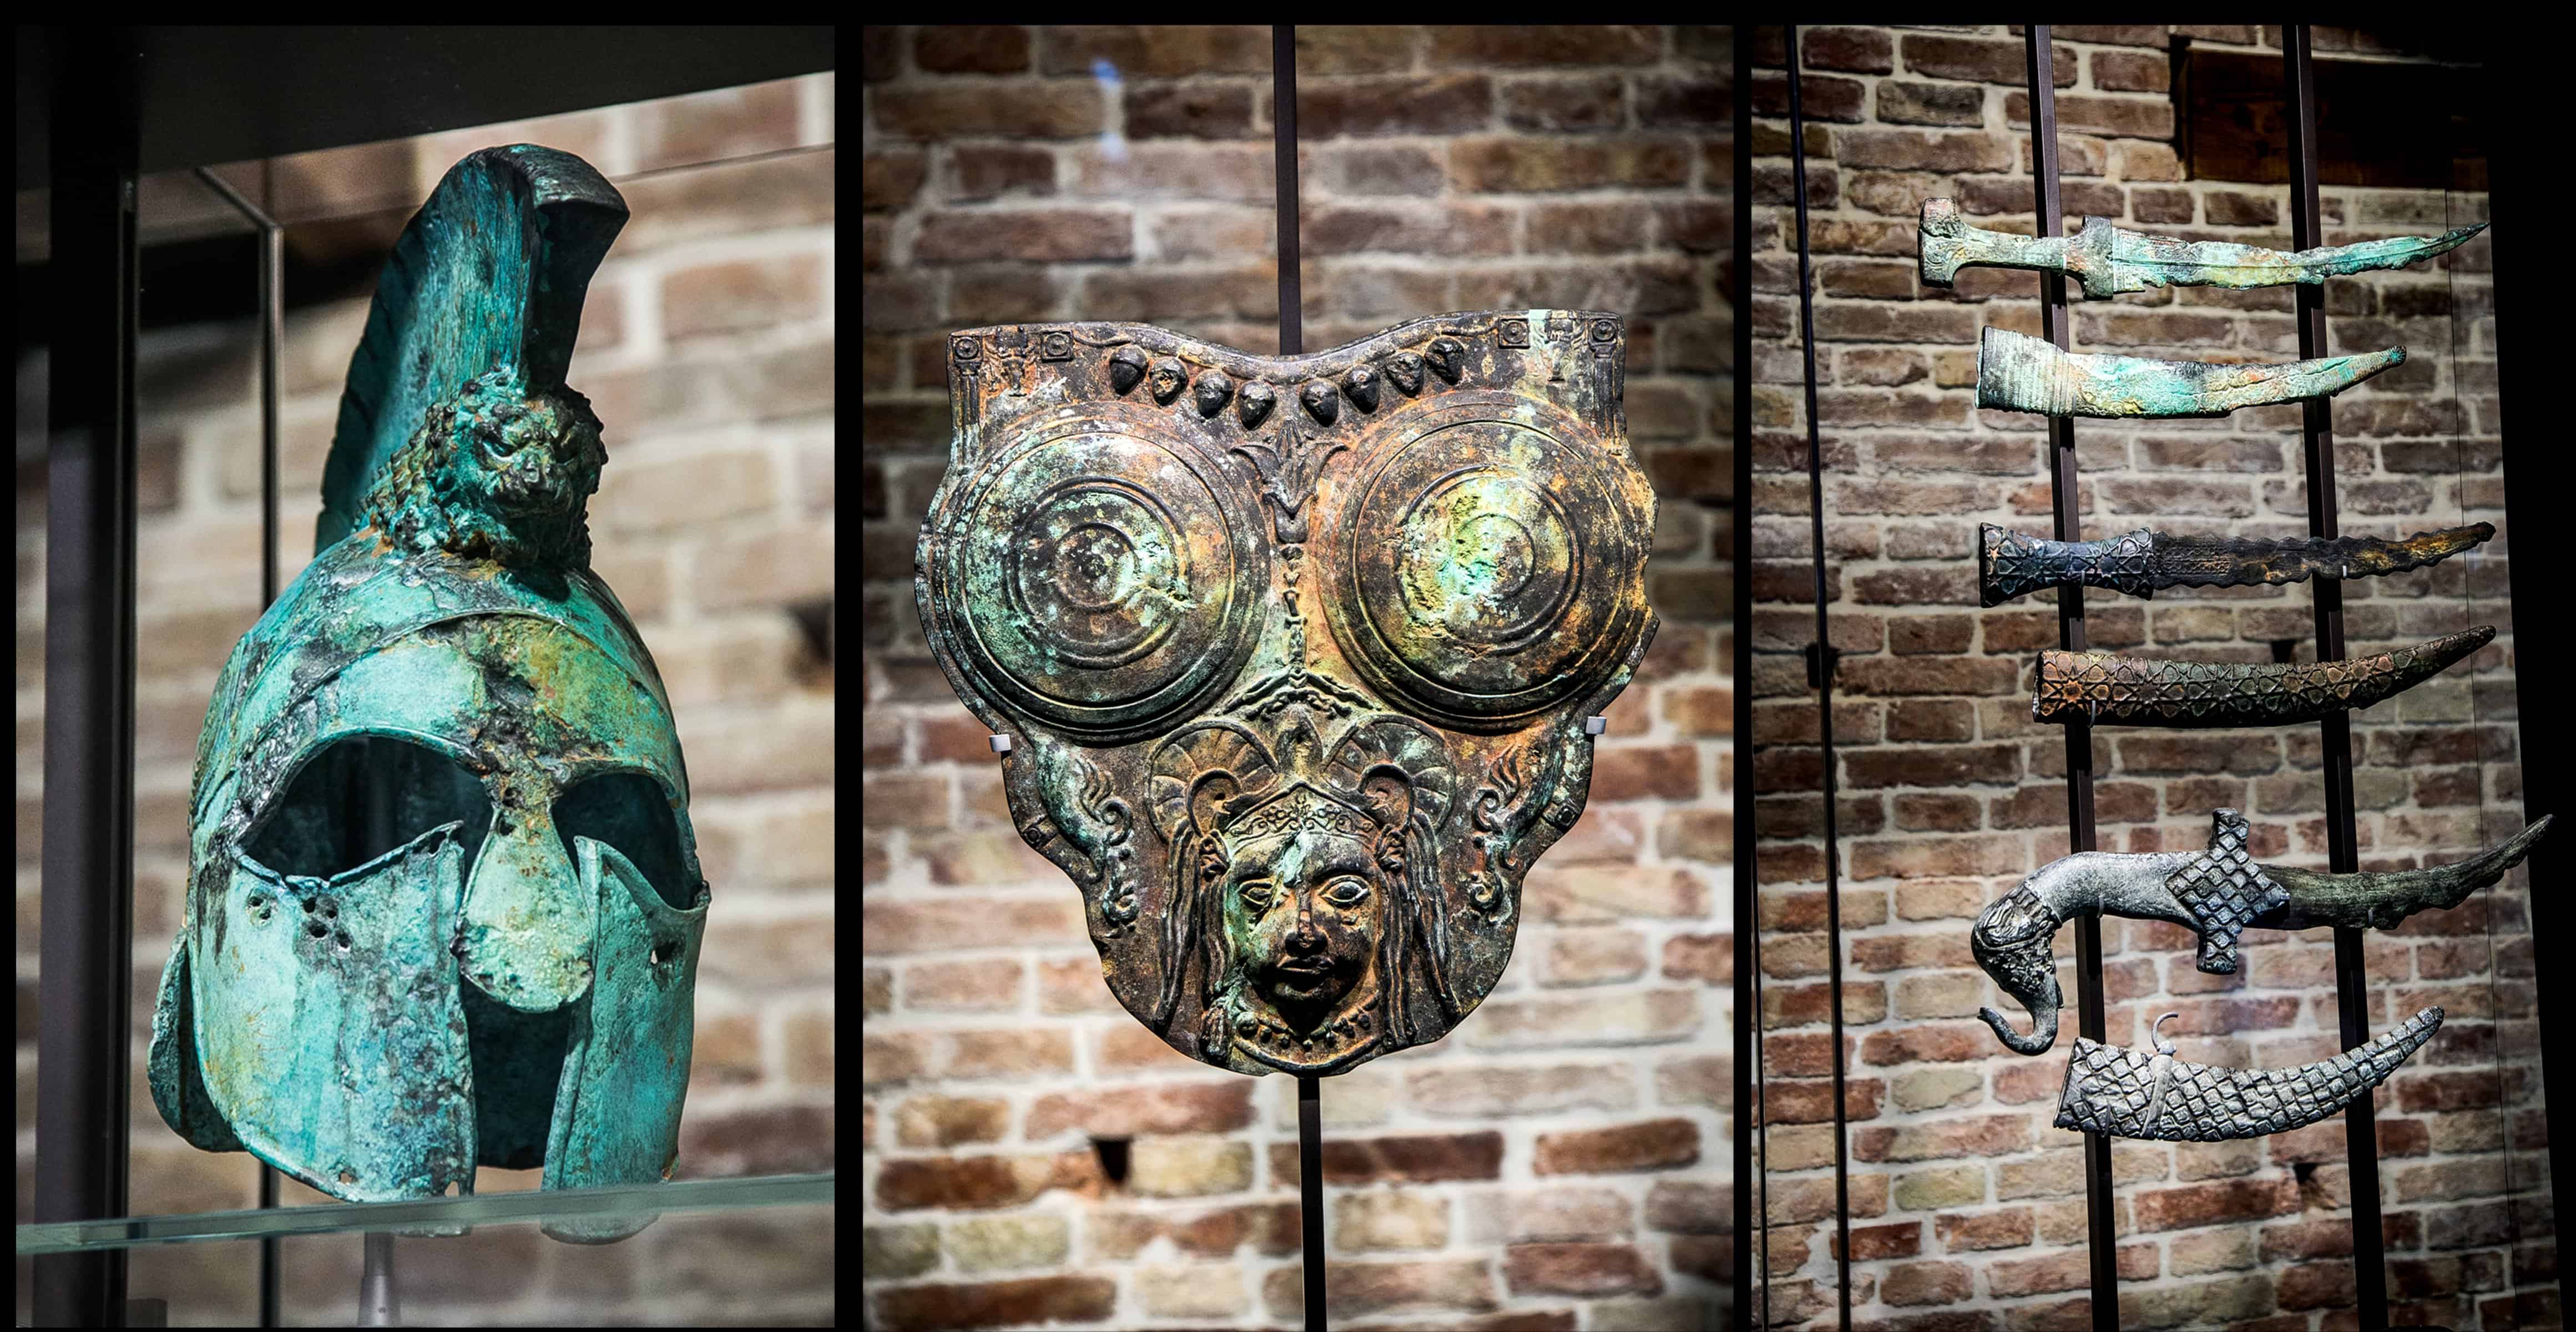 Damien Hirst, Treasures from the Wreck of the Incredible, Venice galleries